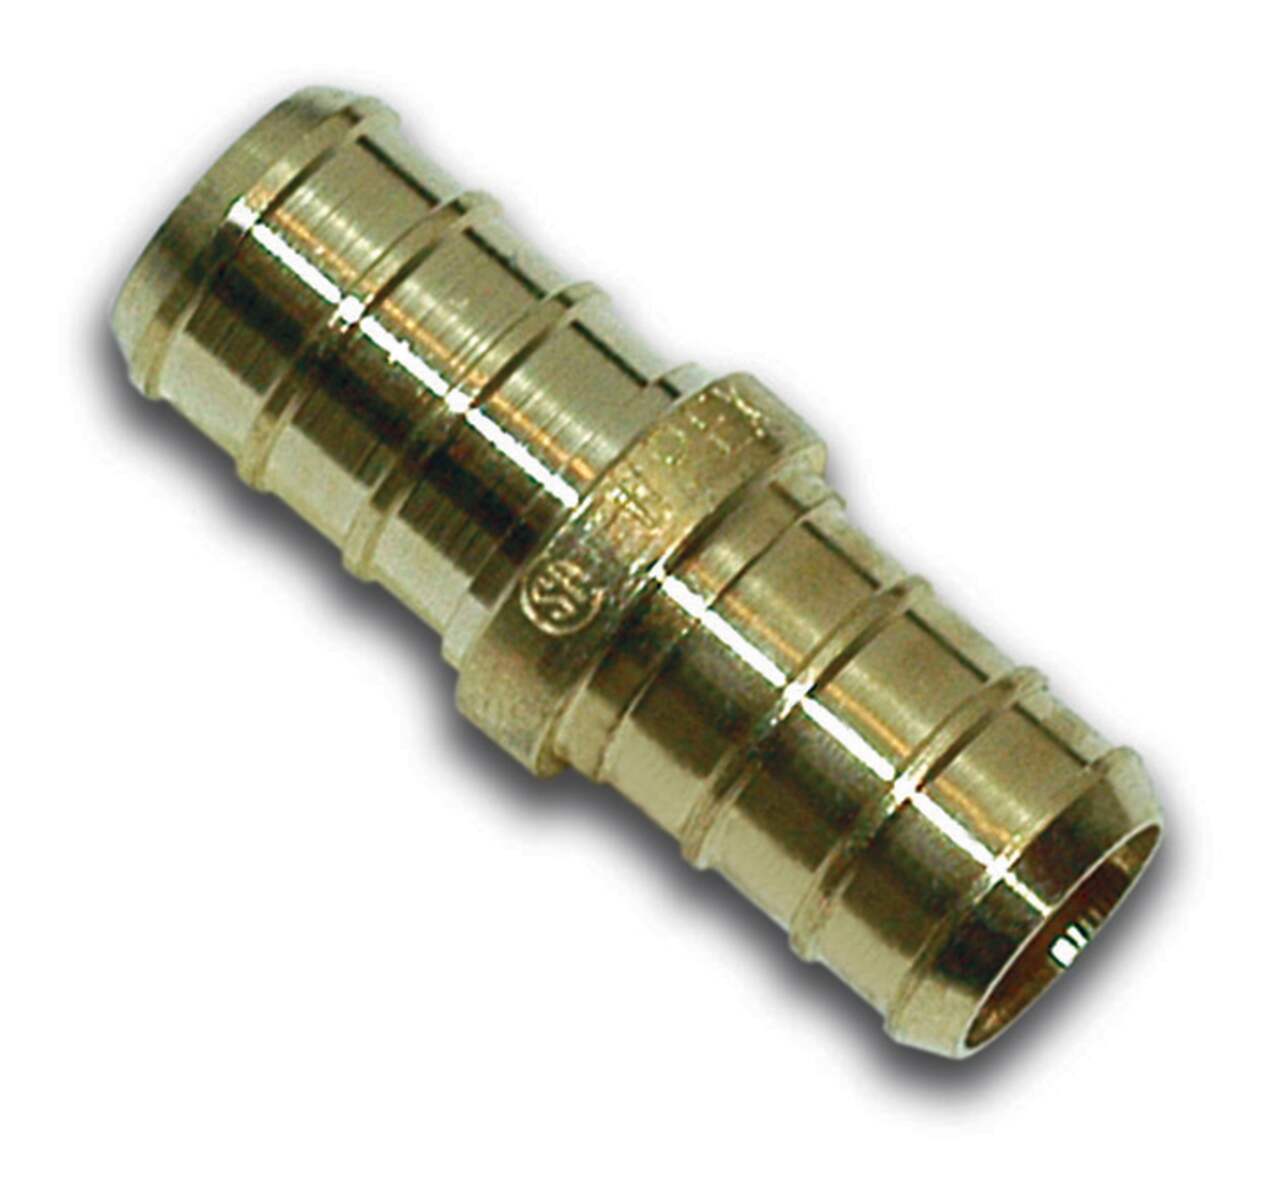 Waterline Solid Brass Coupling Fitting for PEX Pipe, 1/2-in